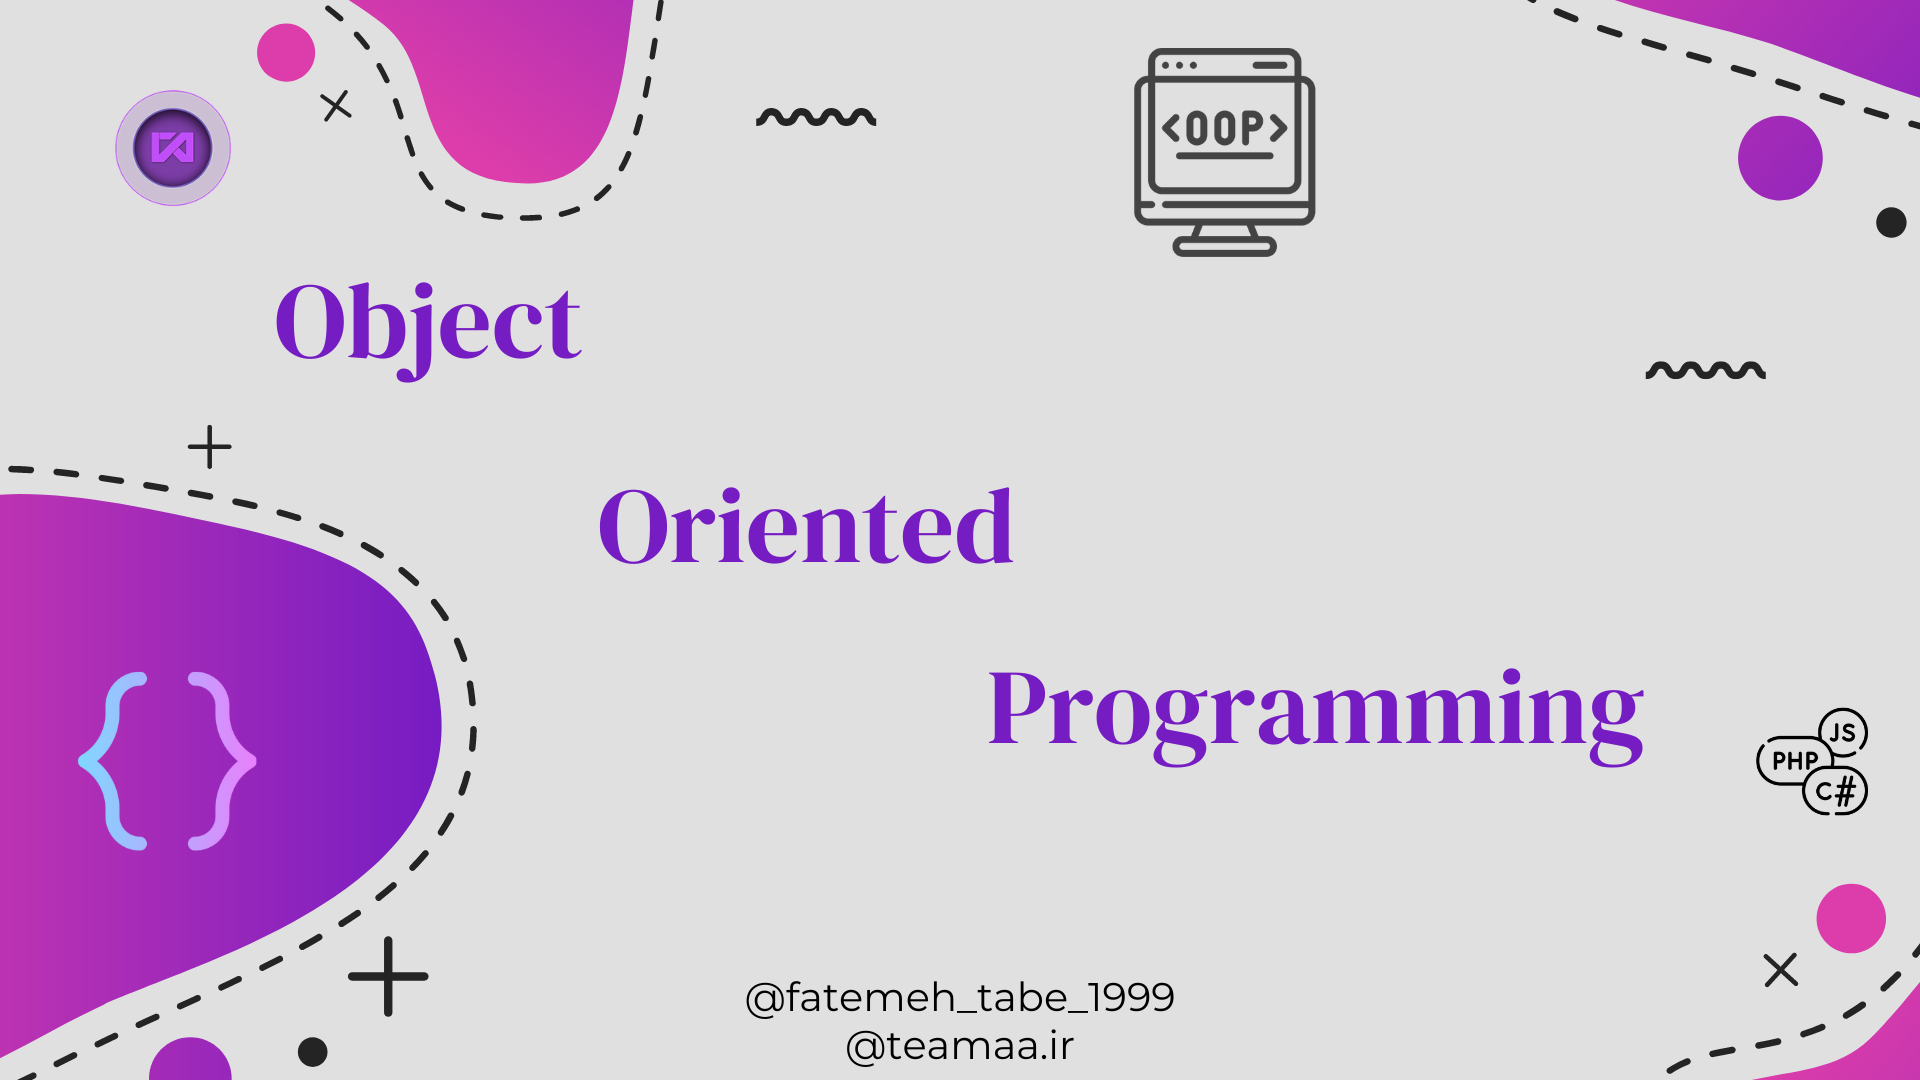 https://teamaa.ir/Assets/Images/Blog/TEAMAA-(QHYXX5j3)_Object Oriented Programming.png